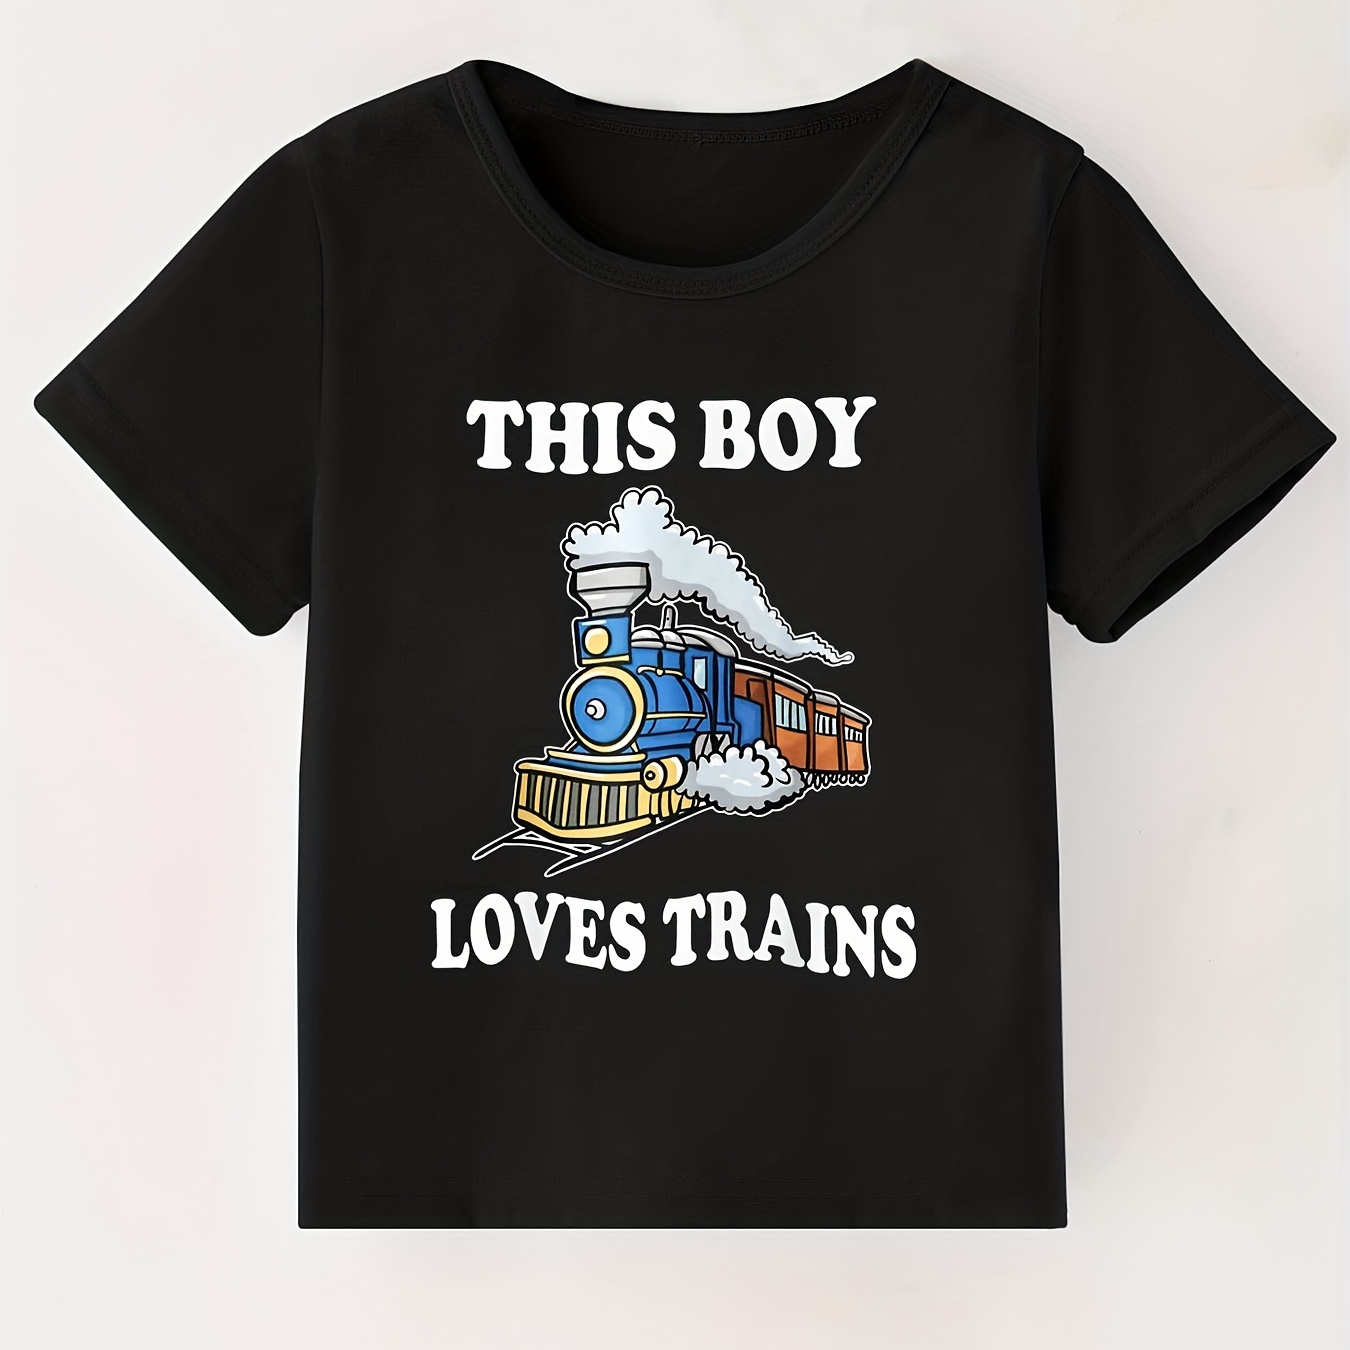 

This Boy Loves Trains Letter Print T Shirt, Tees For Kids Boys, Casual Short Sleeve T-shirt For Summer Spring Fall, Tops As Gifts